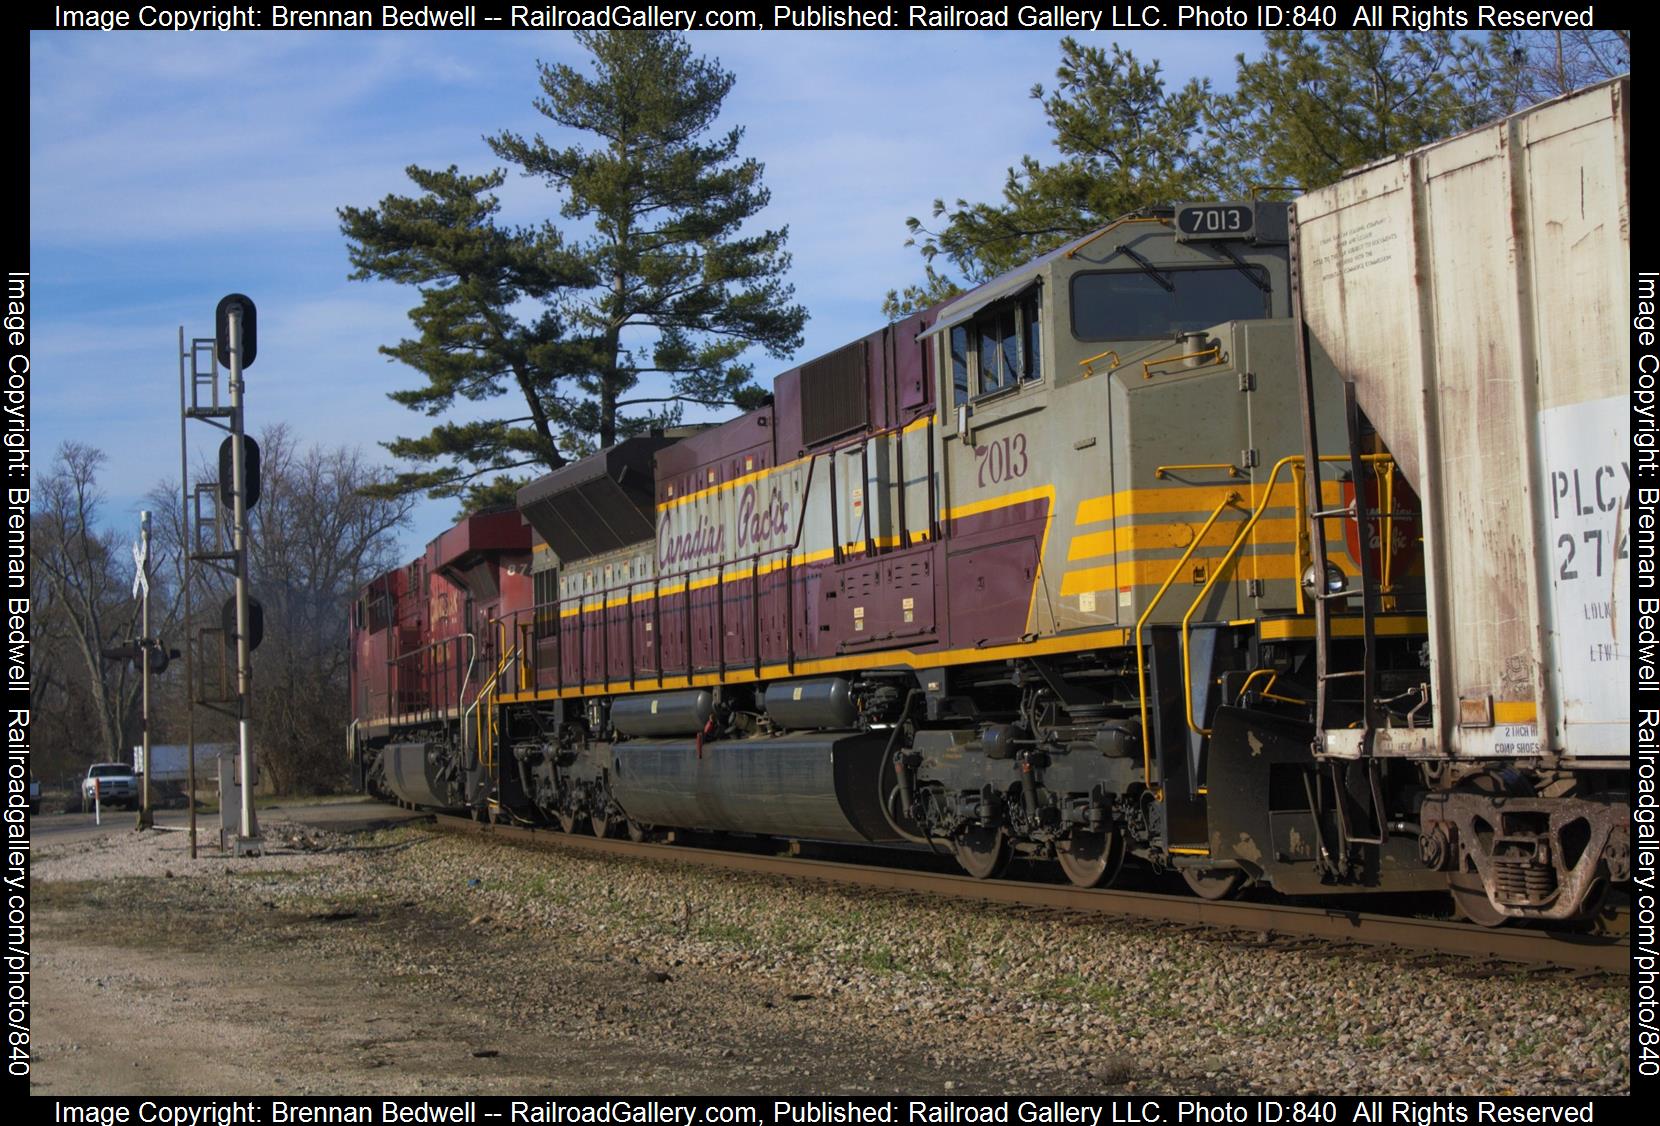 CP 7013 is a class SD70ACU and  is pictured in Vincennes, Indiana, United States .  This was taken along the CE&D Subdivision on the Canadian Pacific Railway. Photo Copyright: Brennan Bedwell uploaded to Railroad Gallery on 03/13/2023. This photograph of CP 7013 was taken on Sunday, March 05, 2023. All Rights Reserved. 